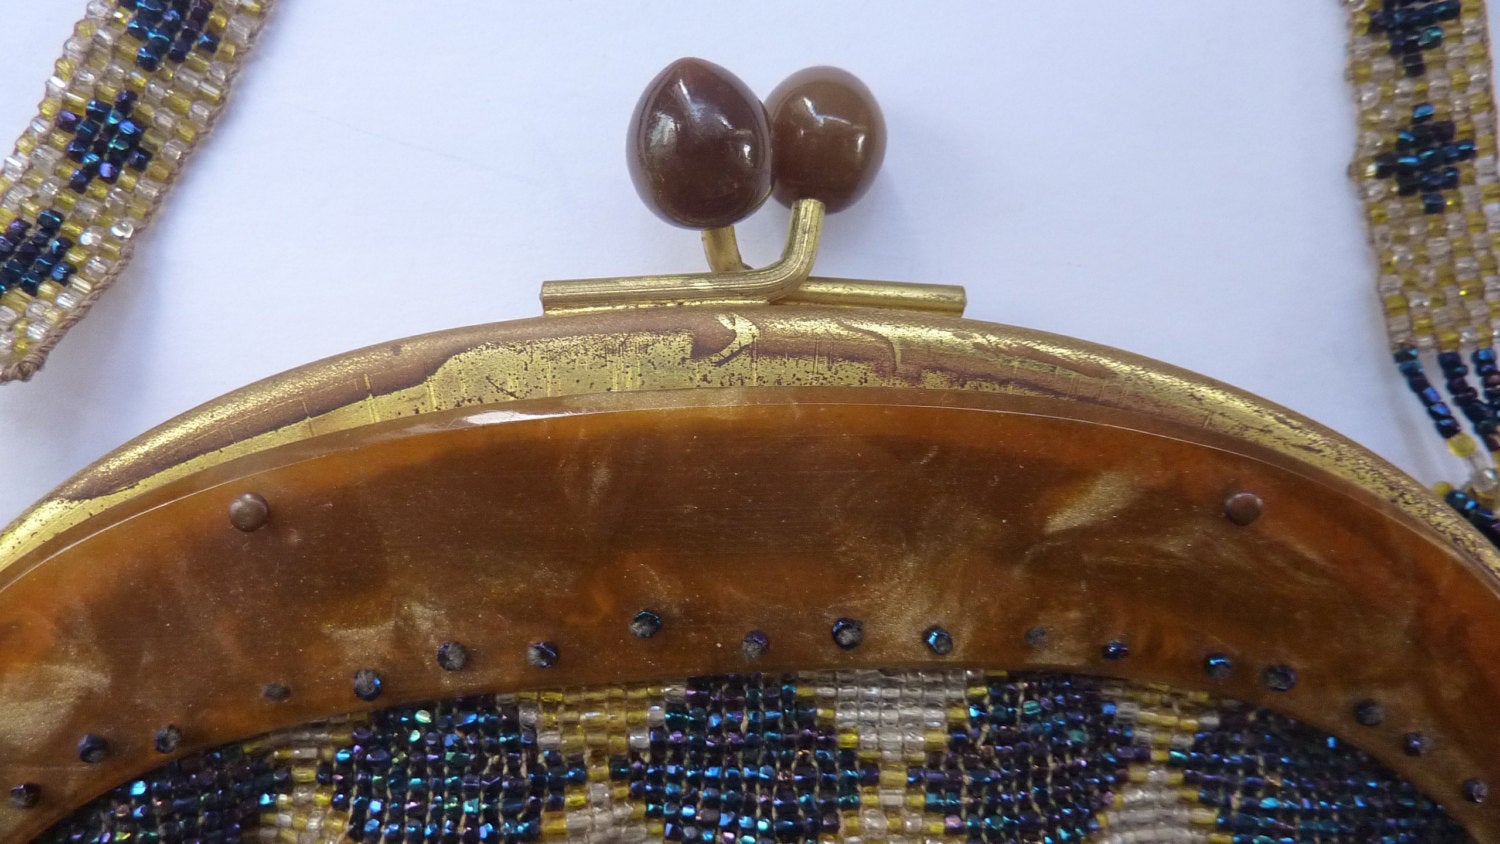 Evening Bag 1930's Black and Gold Beaded Clasp Brass 